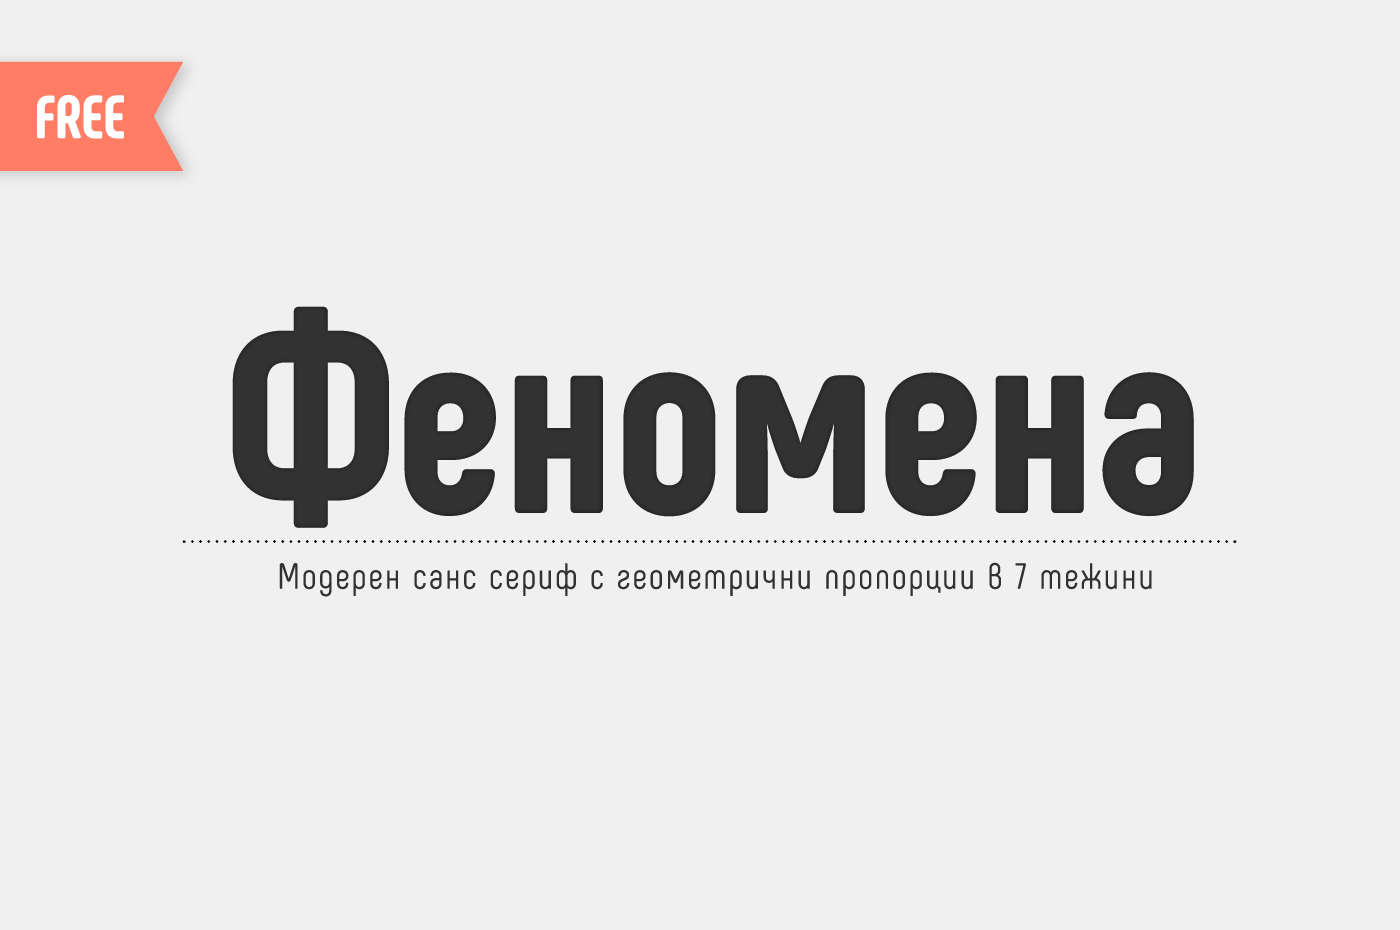 Free font free fonts free typography poster narrow кириллица Cyrillic extended latin Latin Typeface Phenomena font Phenomena free phenomena